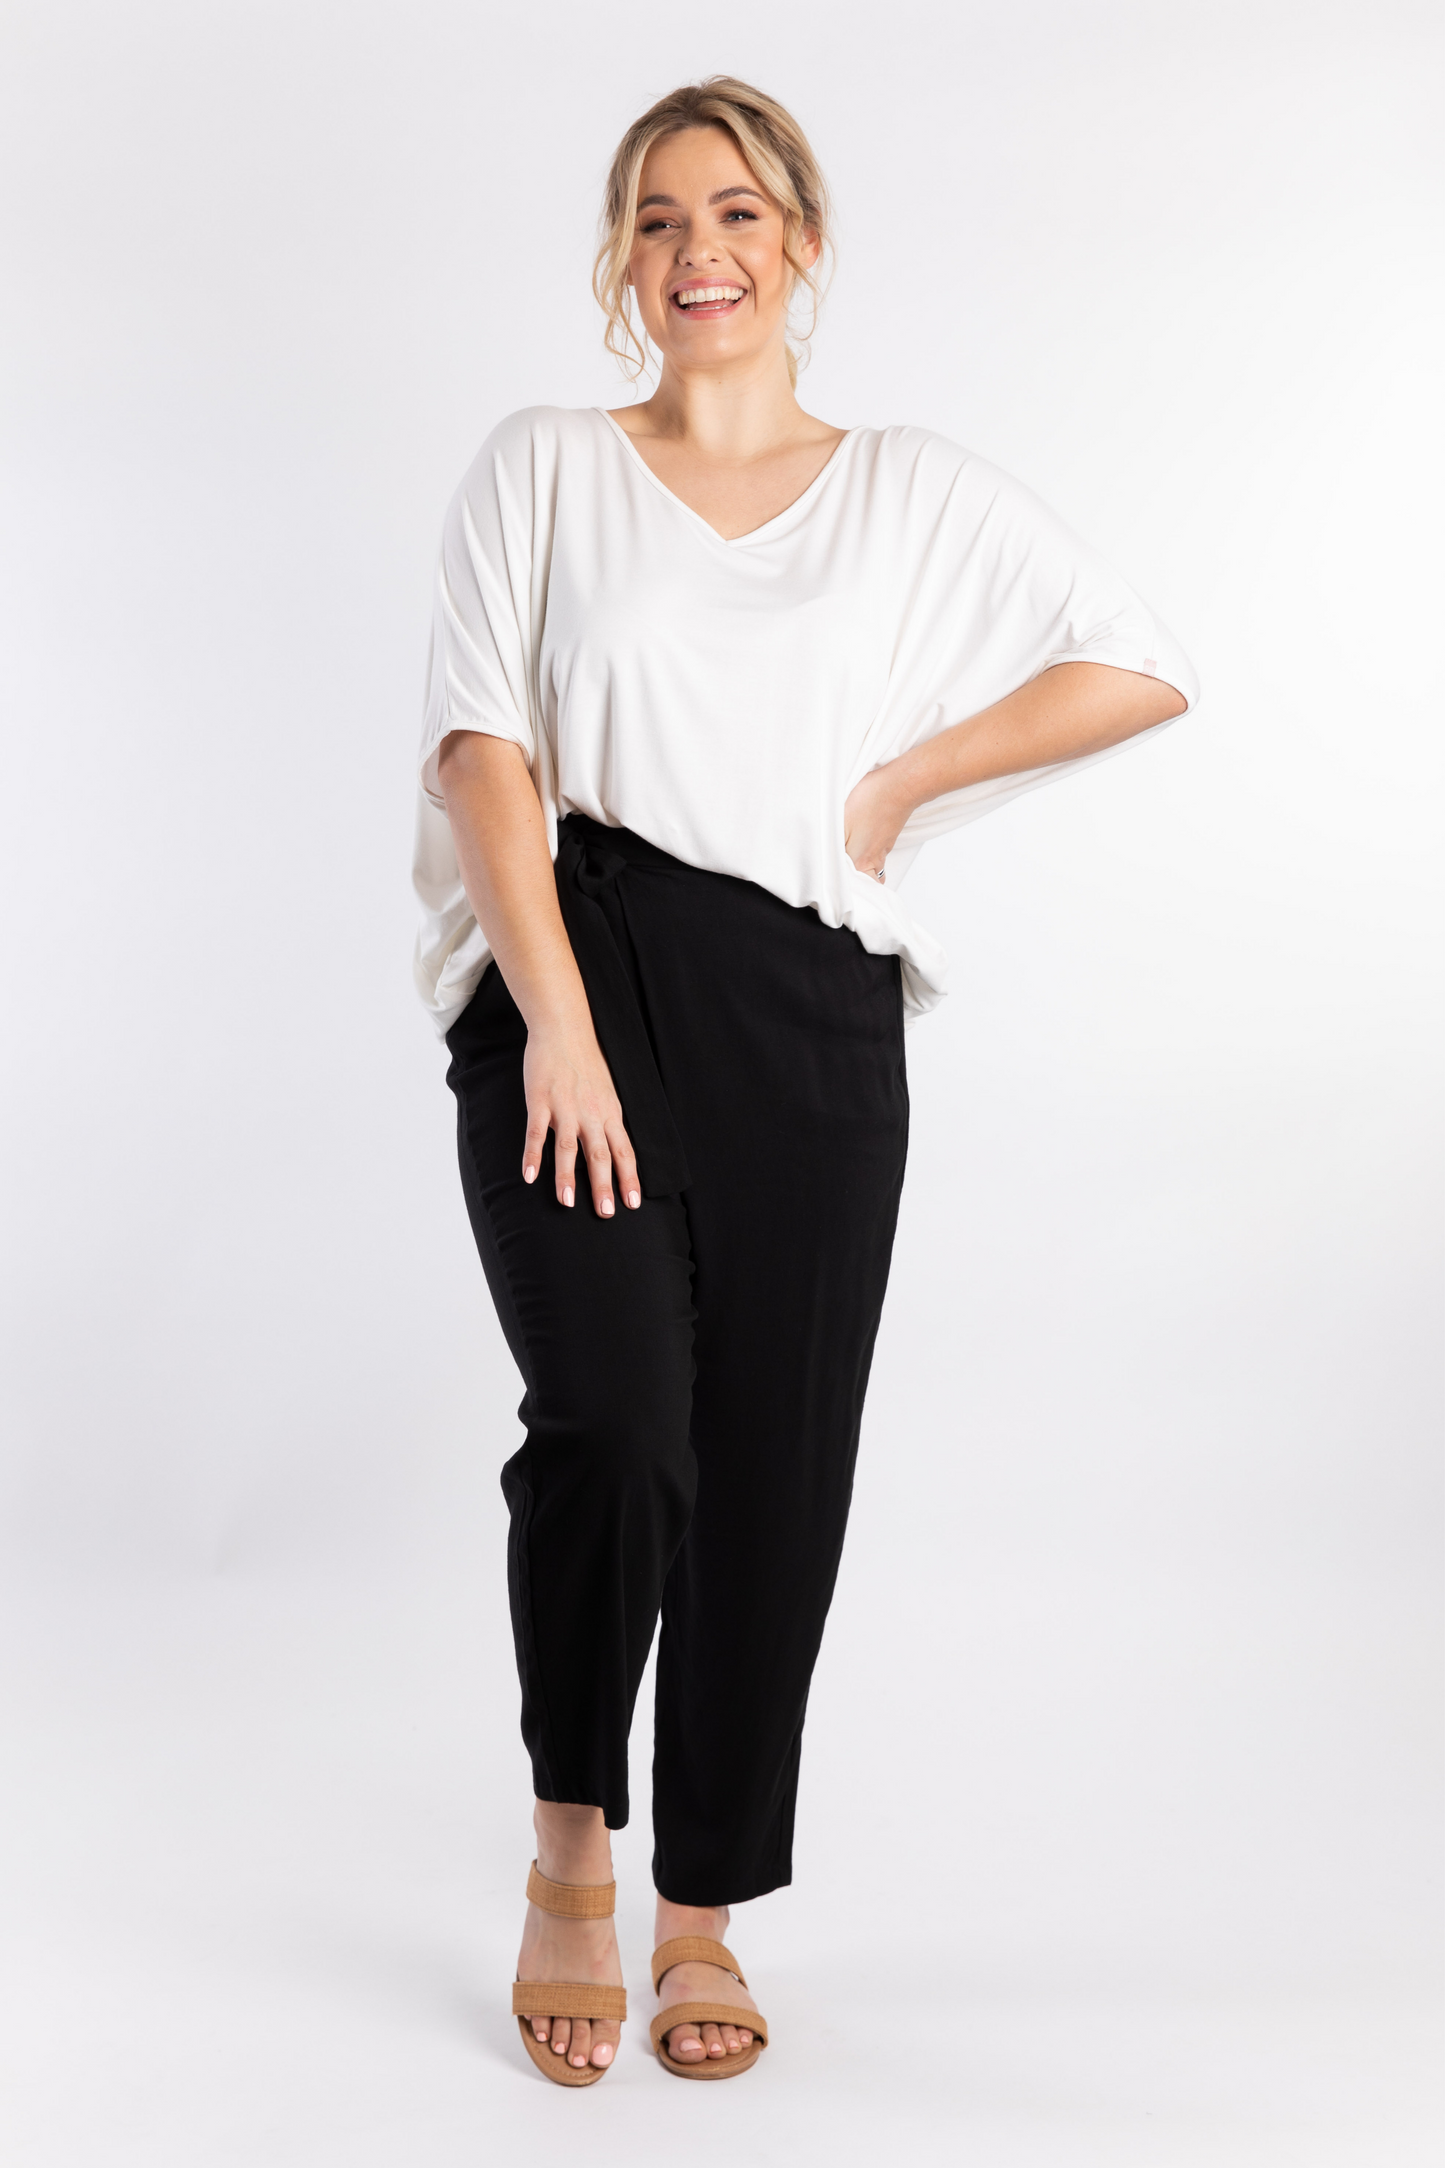 FINAL SALE Melody Pleat Pant in Black